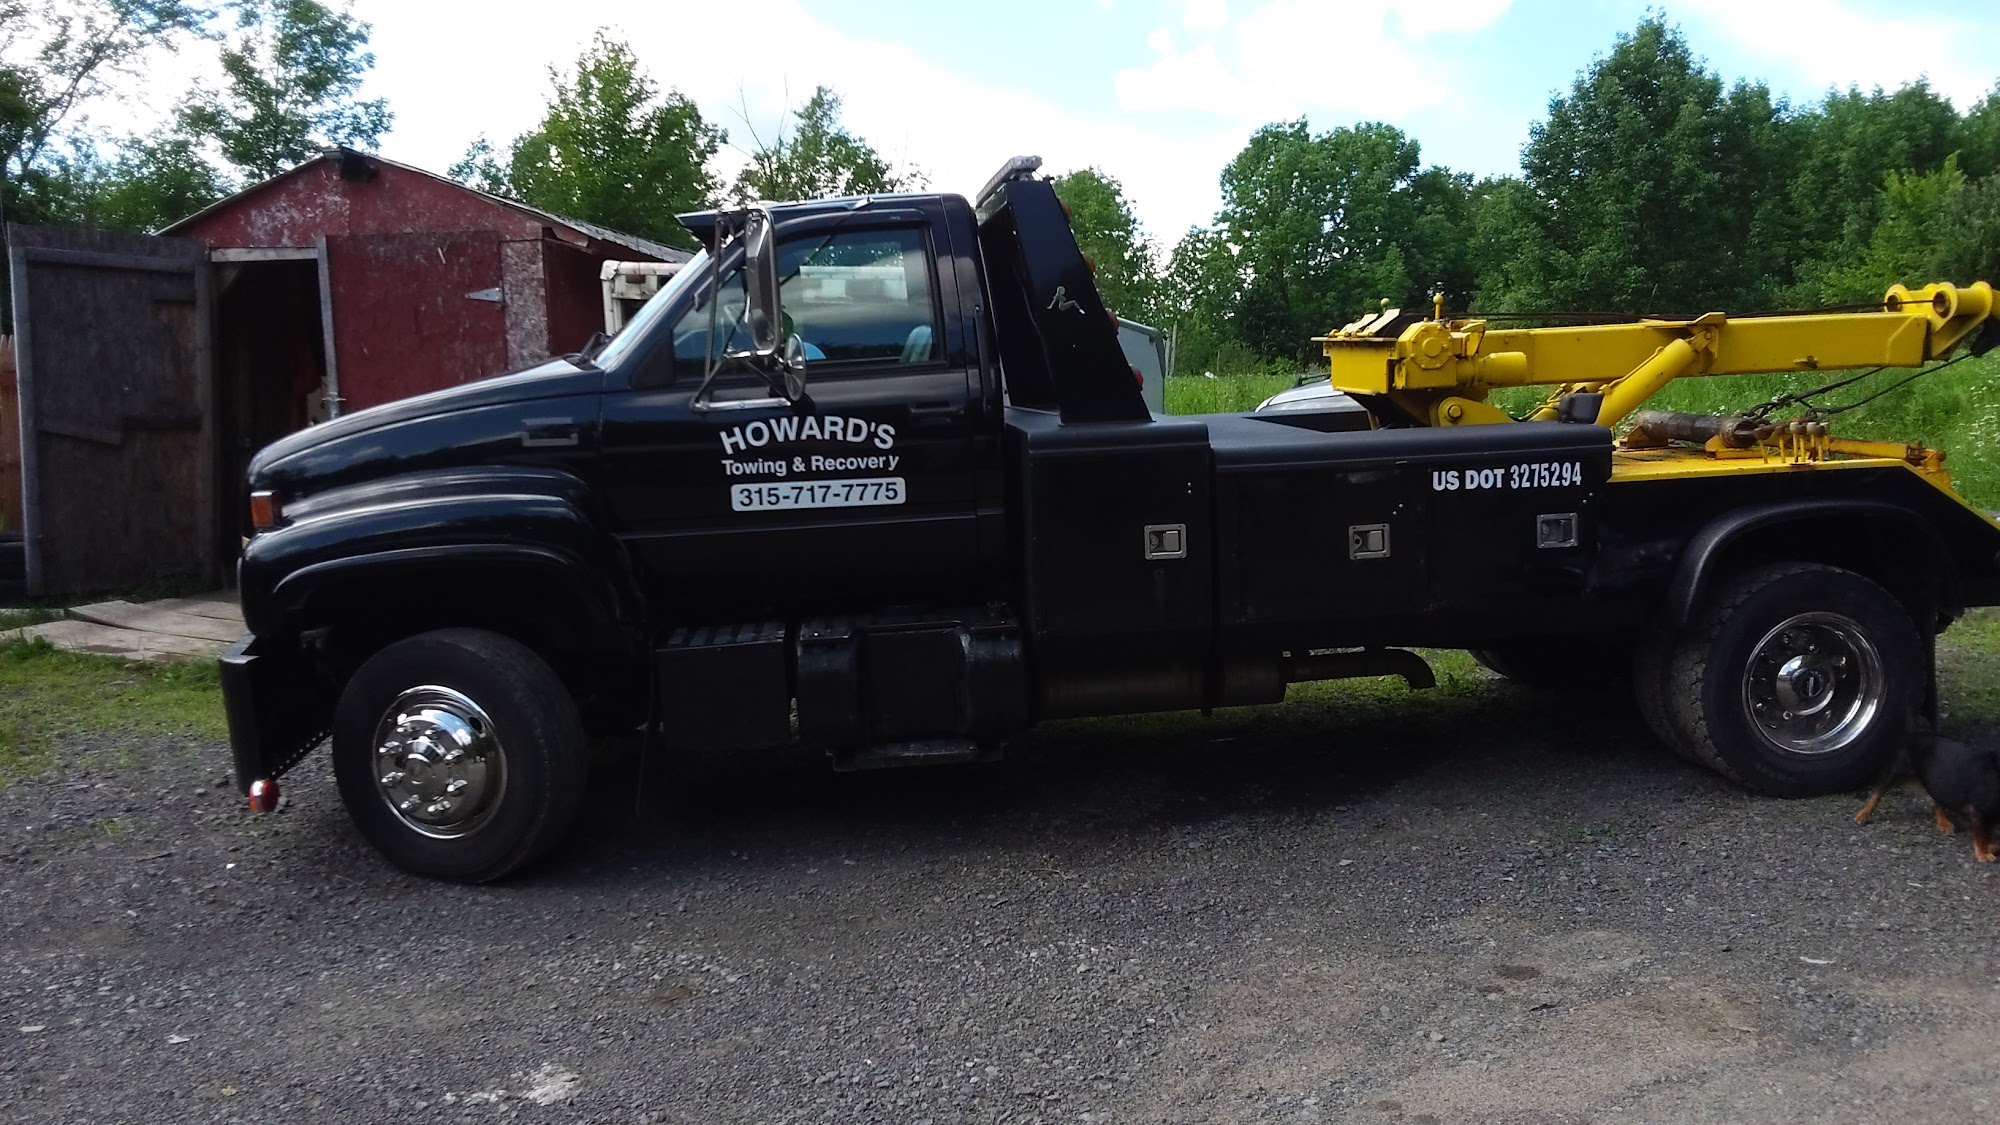 Howard's towing and recovery